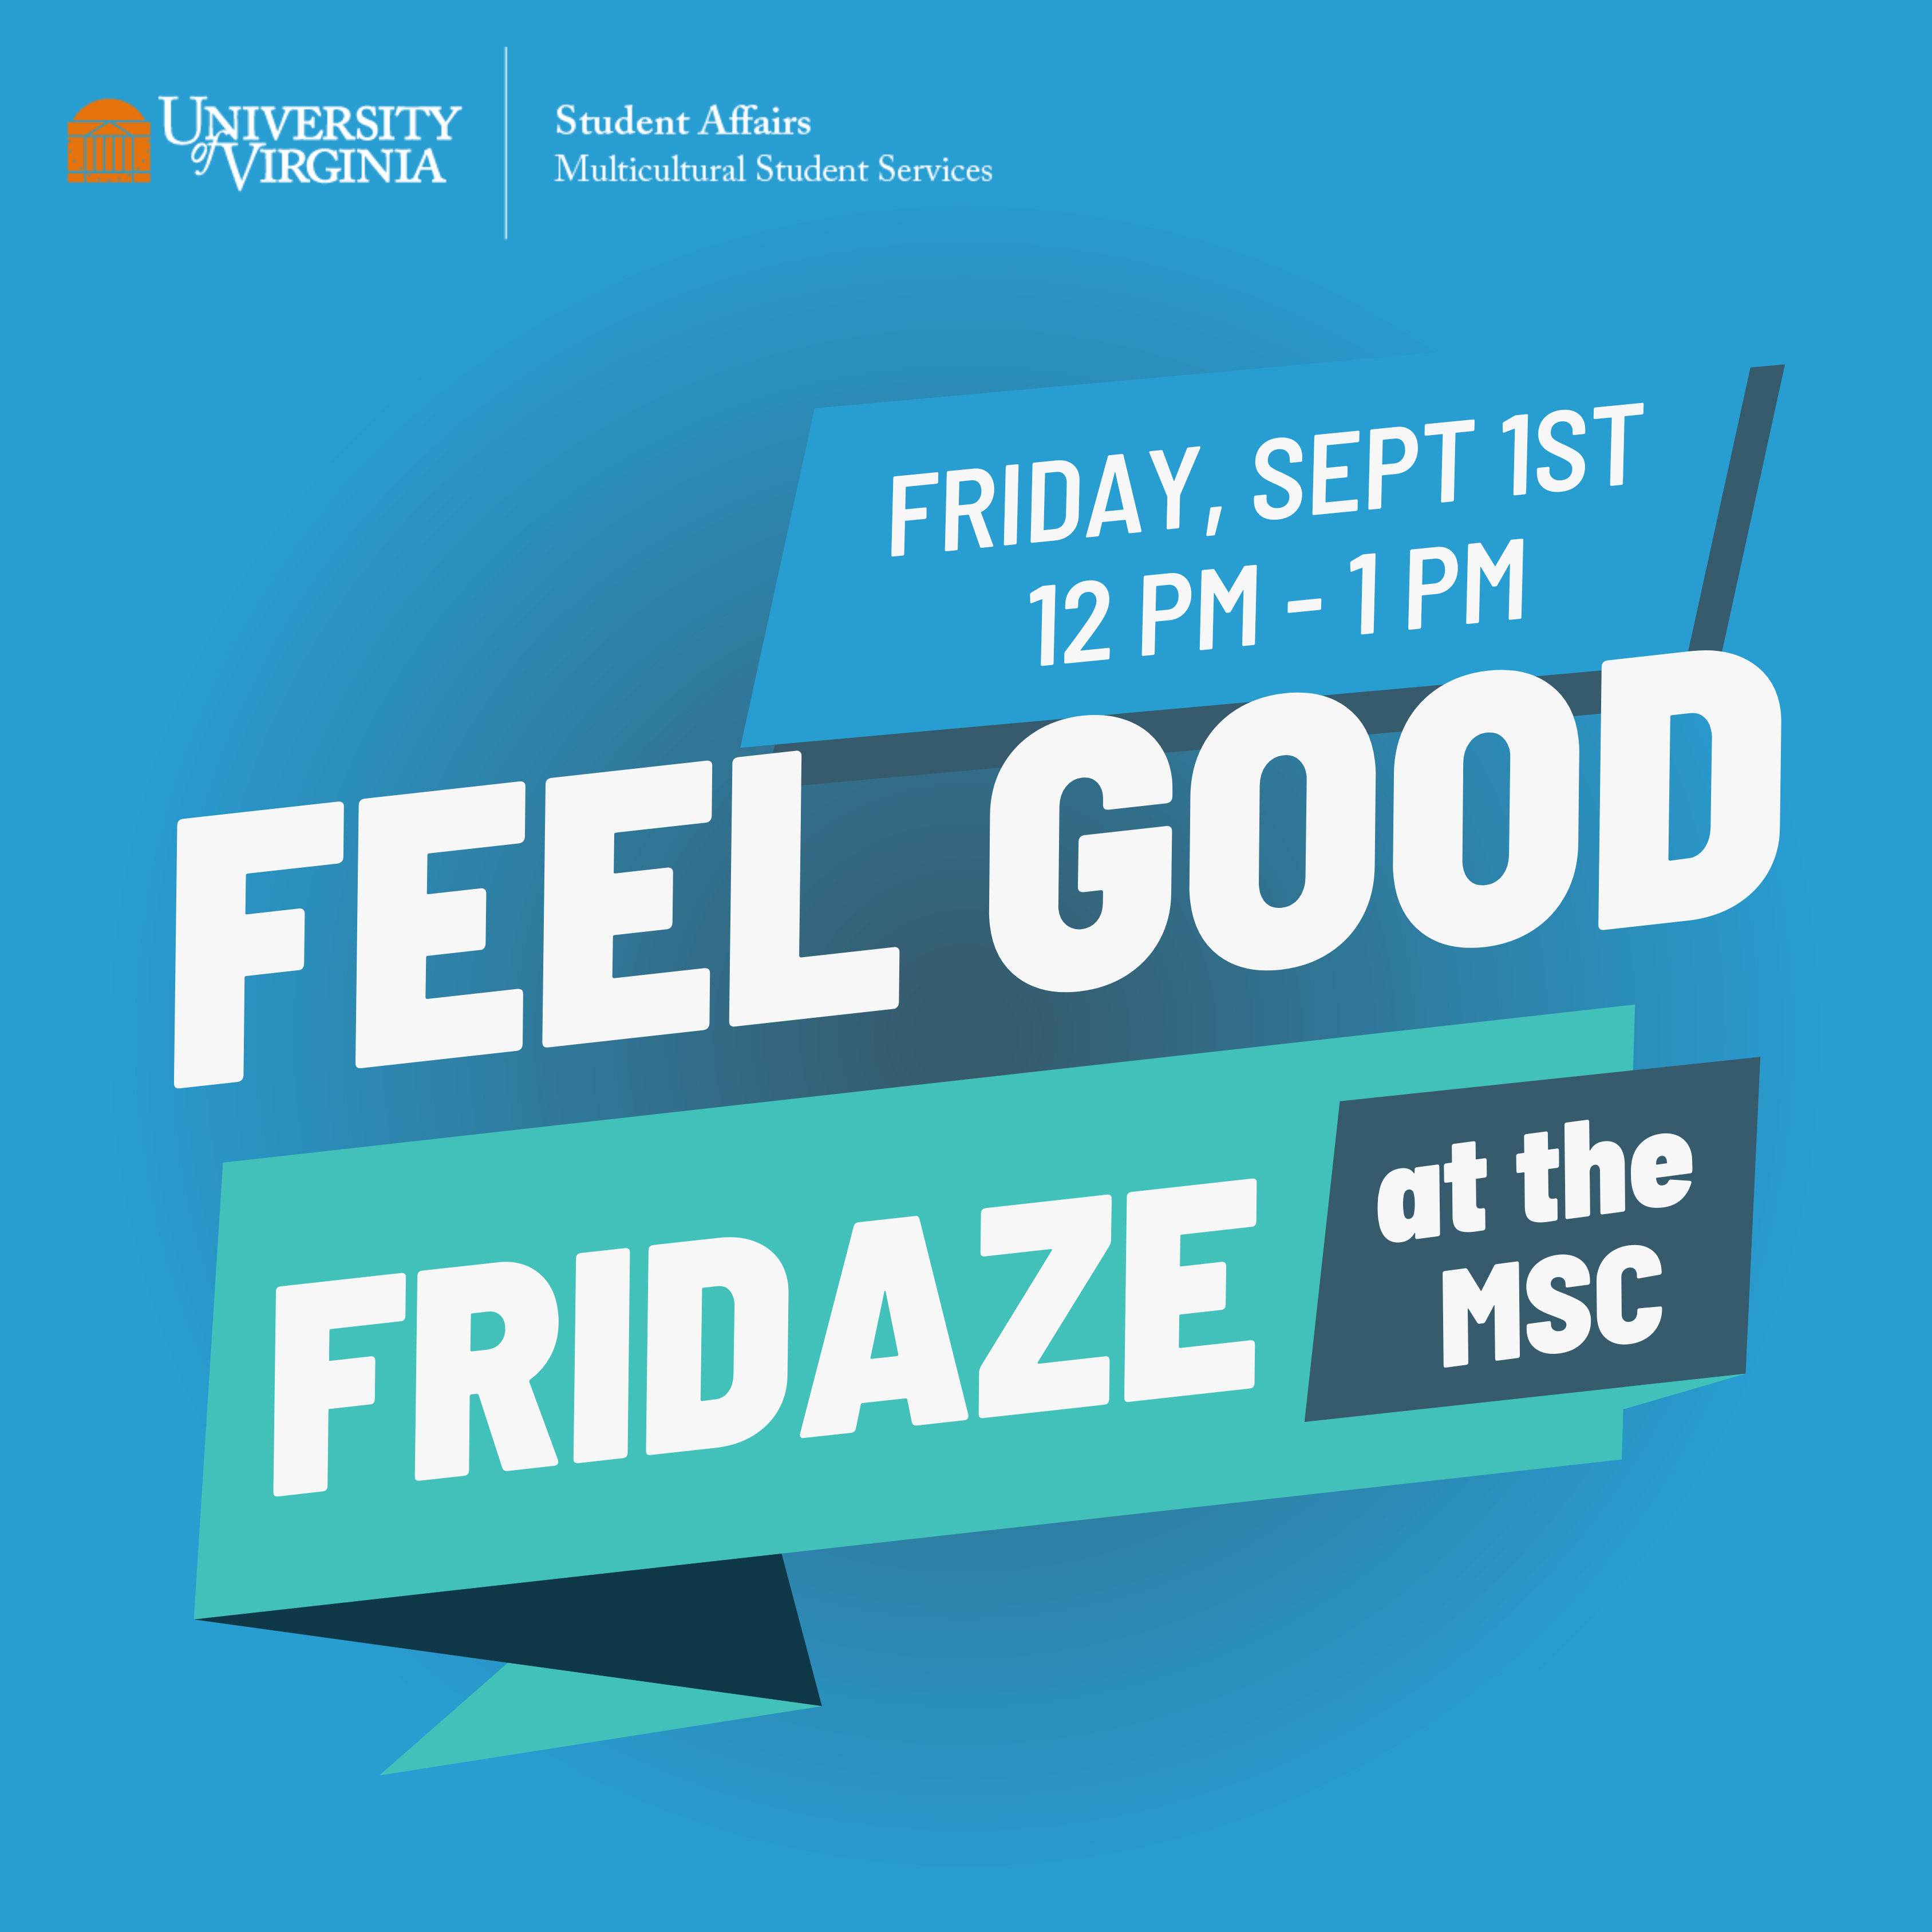 FEEL-GOOD FRIDAZE (first Friday of every month)